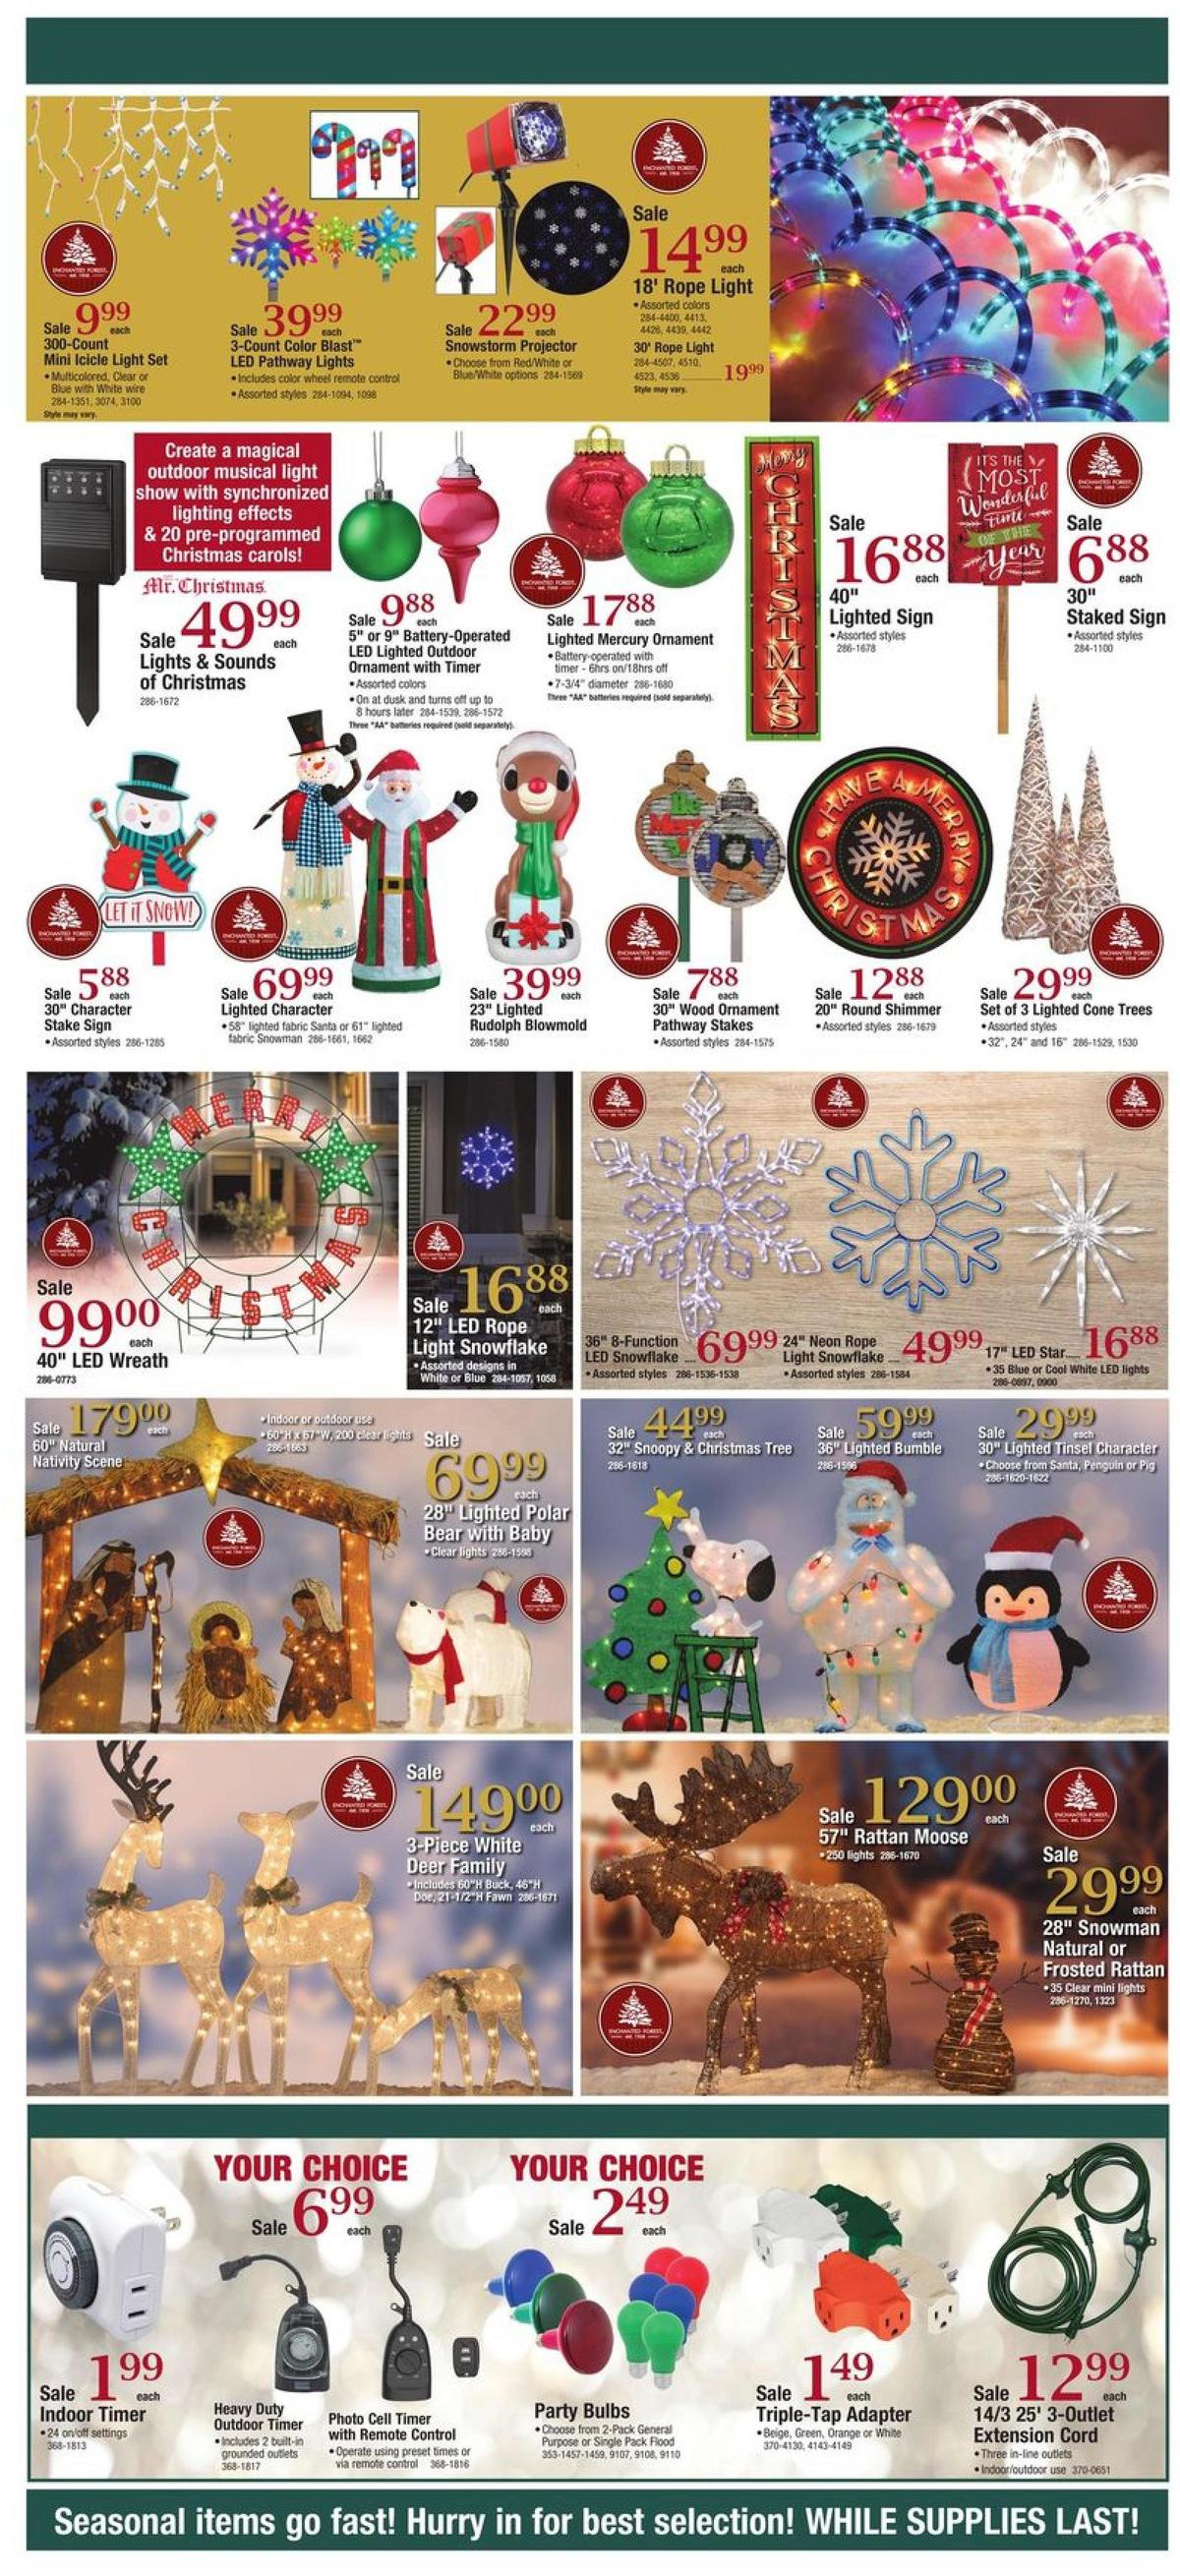 Menards Christmas Decor Sale Weekly Ad from November 1